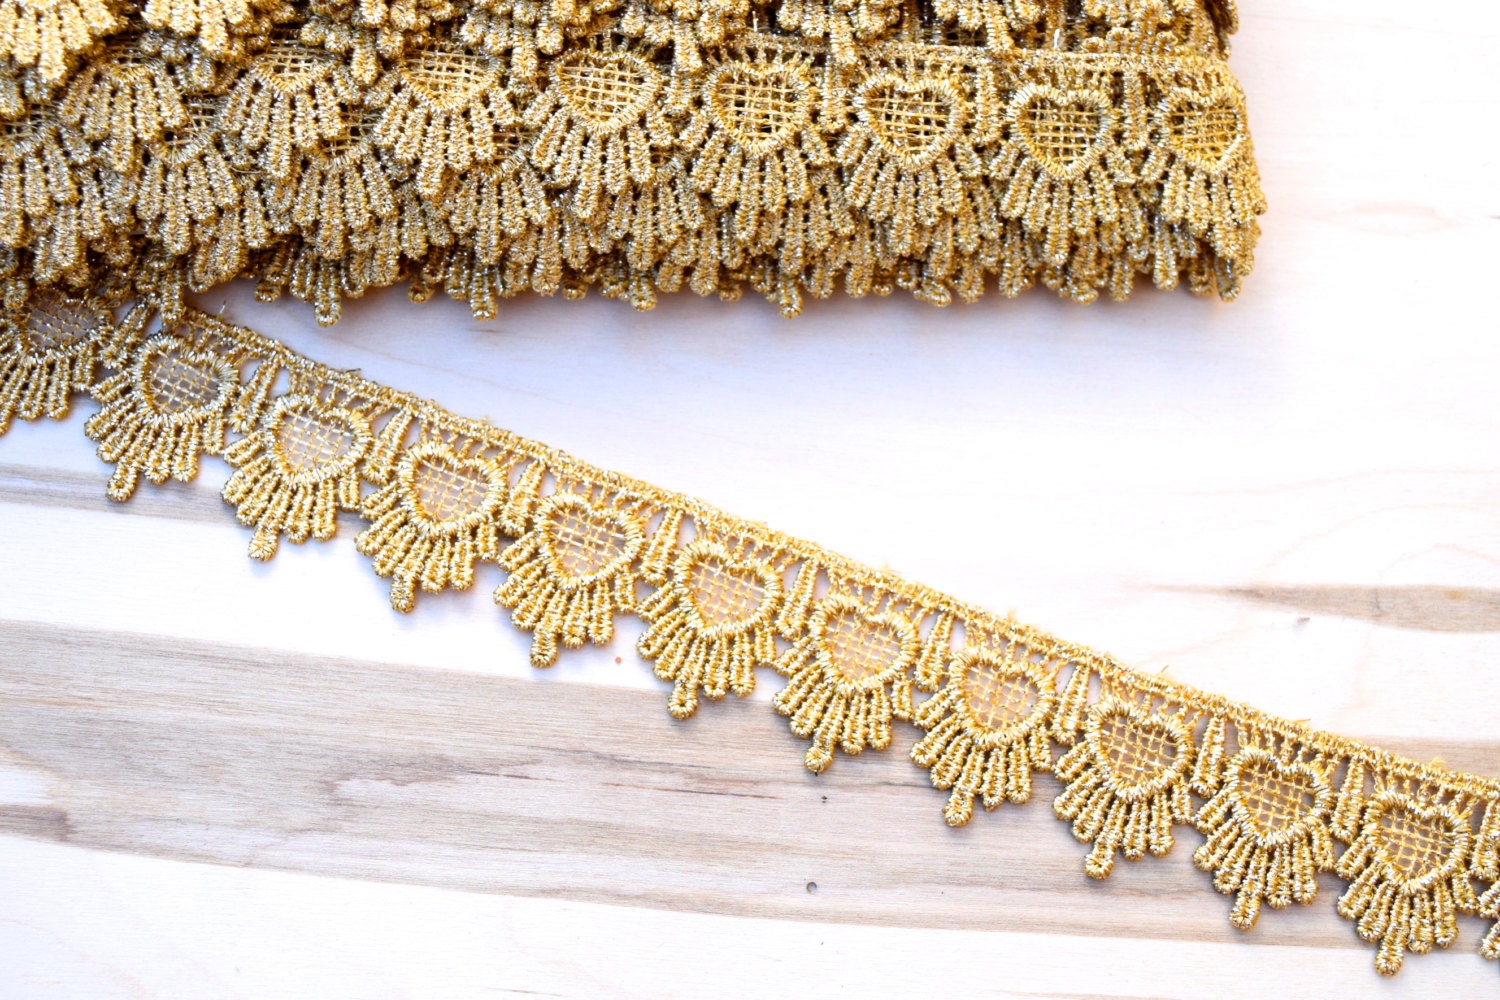 Scalloped Metalic Gold Lace Trim, Gold Lace Fabric, Golden Venise Lace  Trimming for Sewing Supplies, 1 Yard on Sale 